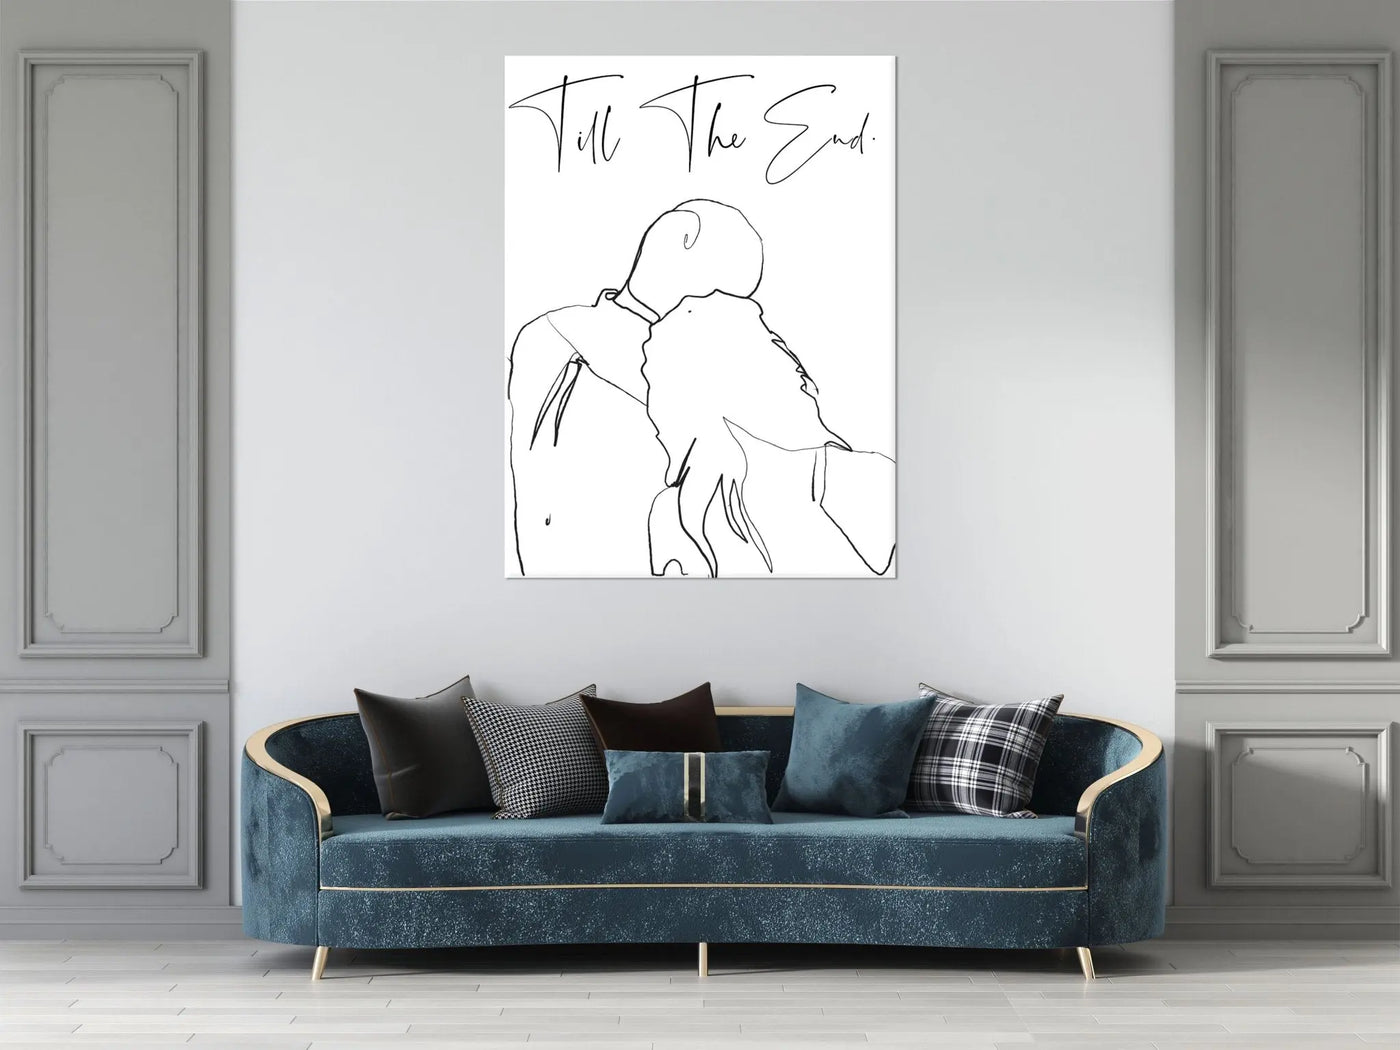 "TILL THE END" - Art For Everyone